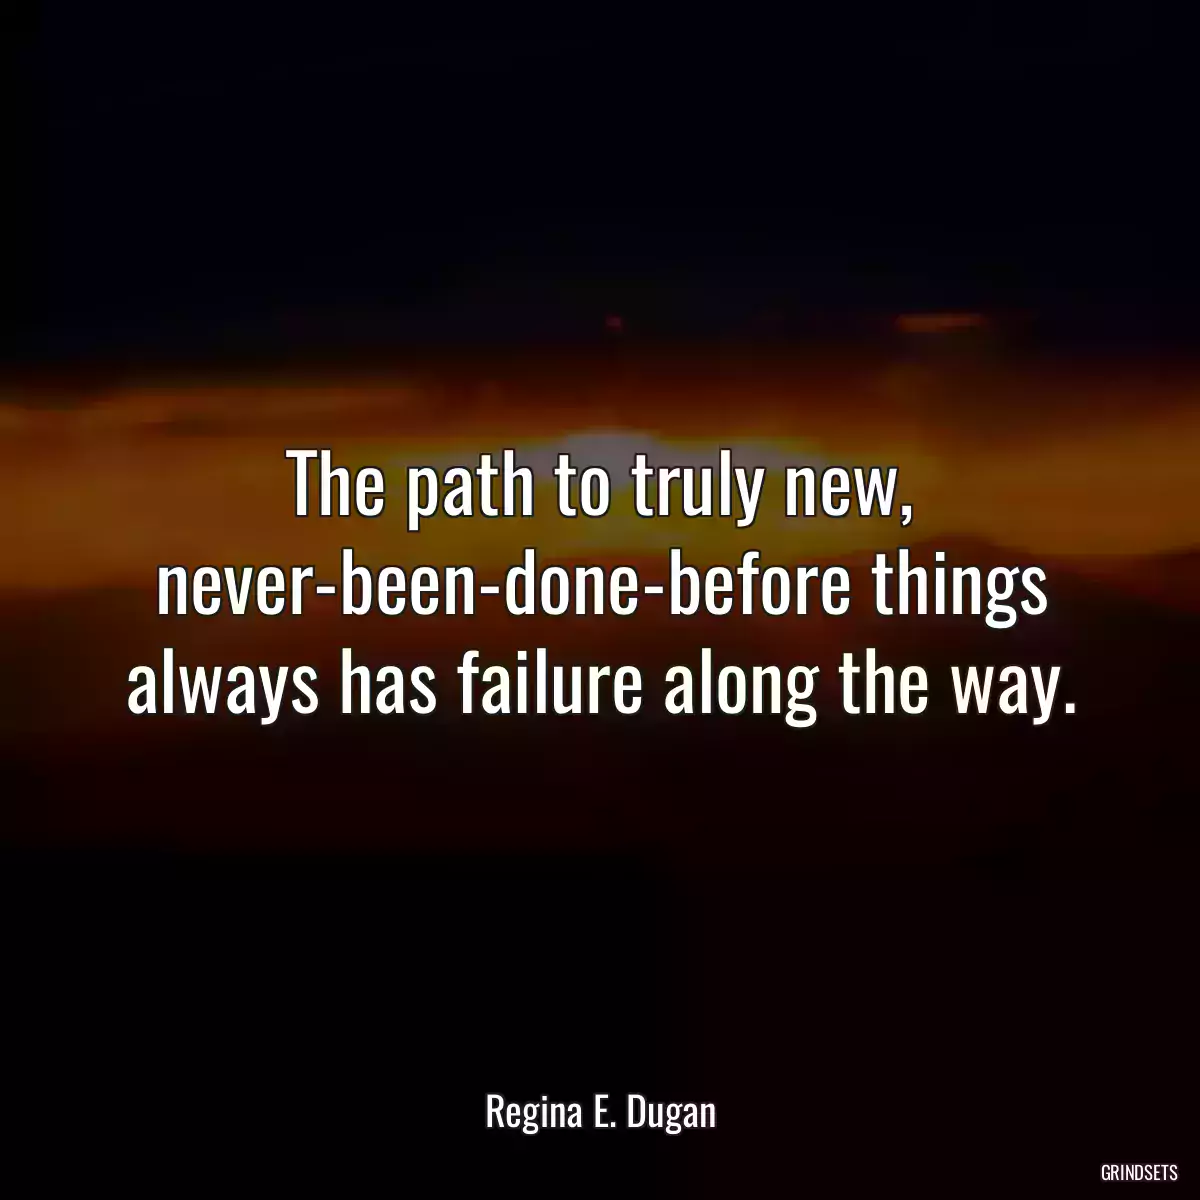 The path to truly new, never-been-done-before things always has failure along the way.